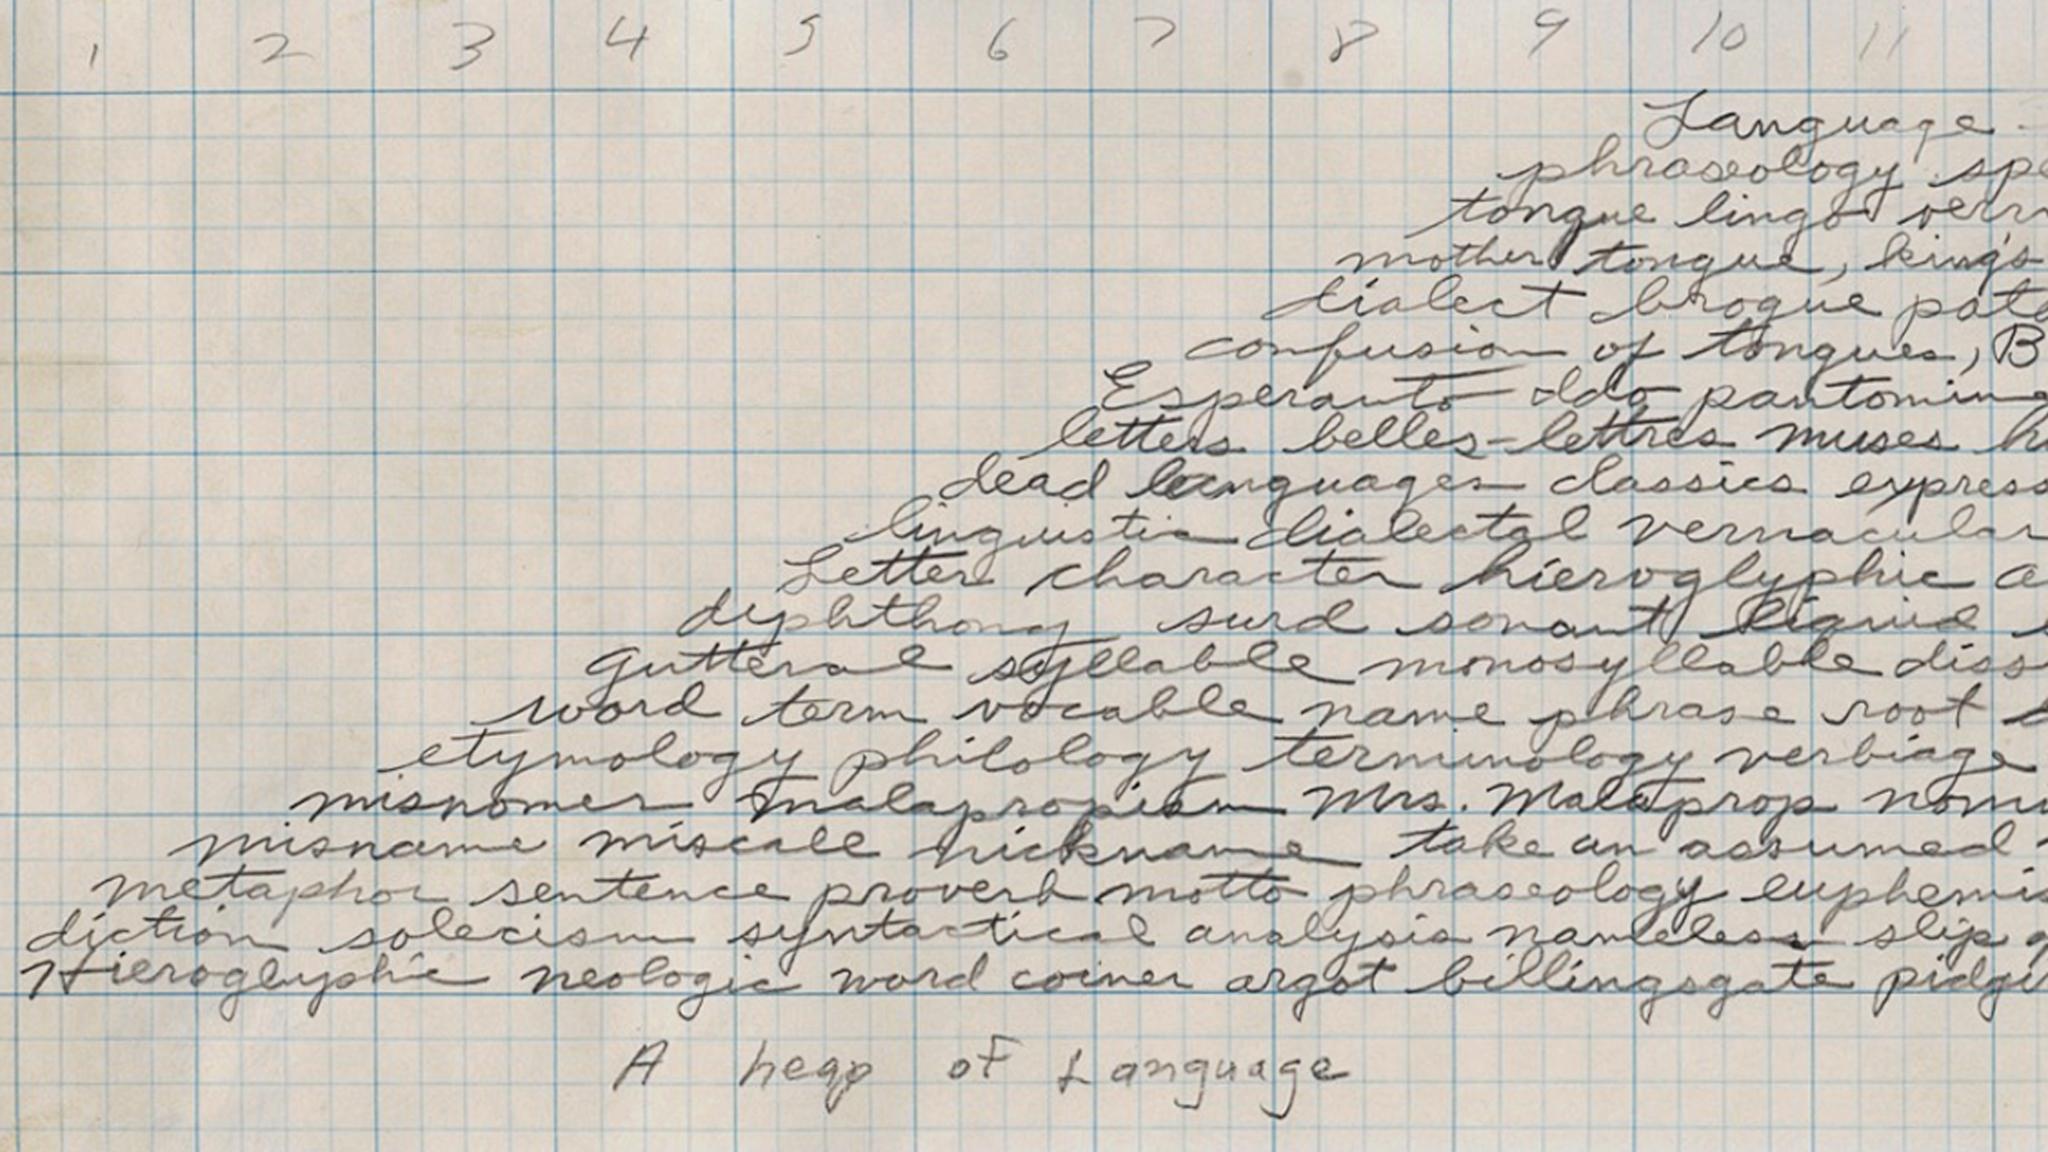 handwritten cursive words in a pyramidal shape with the title "a heap of language" written at the bottom